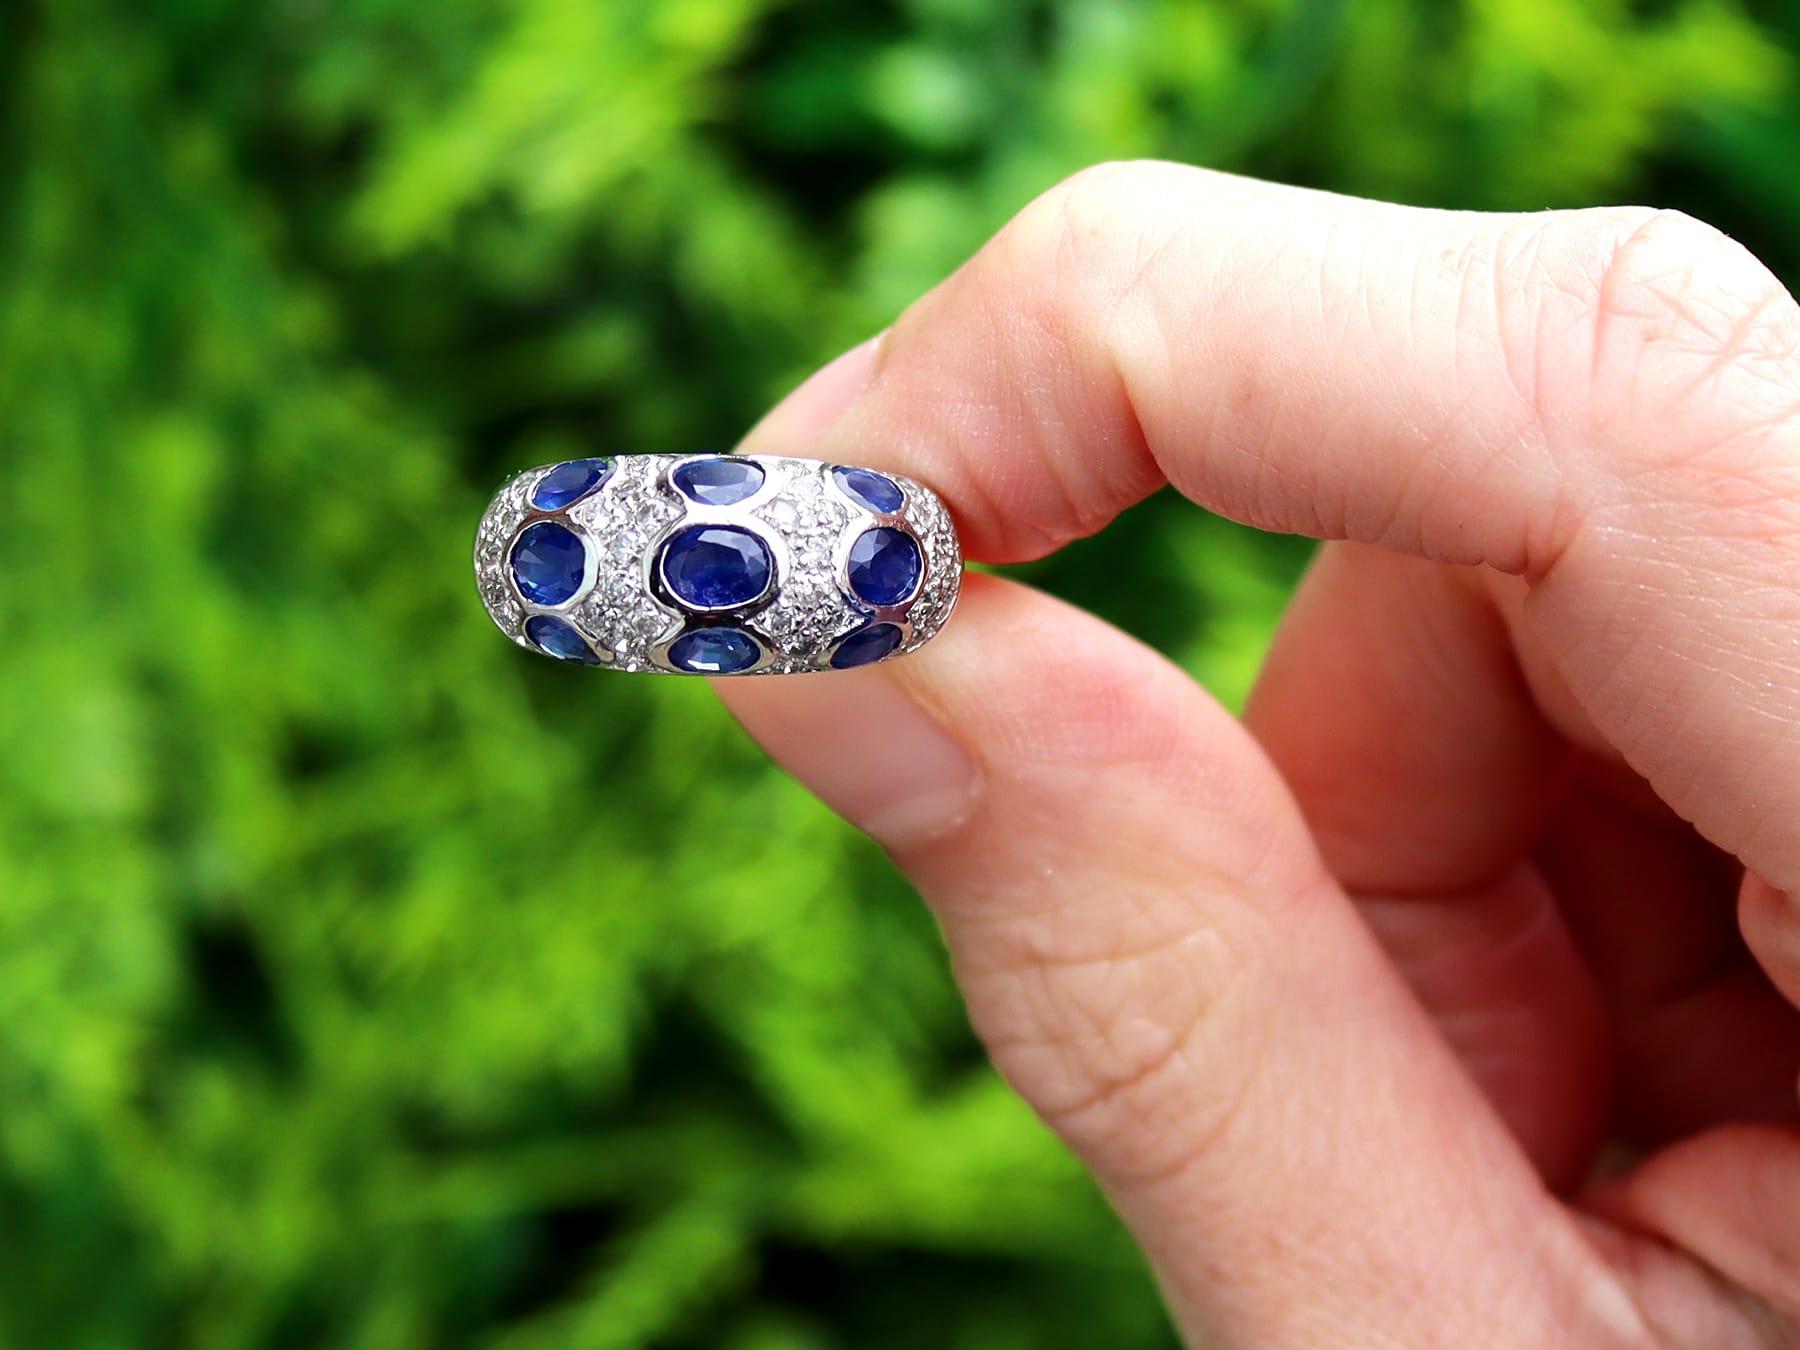 A fine and impressive vintage 2.45 carat sapphire and 0.50 carat diamond, 18 karat white gold dress ring; part of our diverse collection of vintage sapphire rings

This fine and impressive vintage sapphire and diamond ring has been crafted in 18k